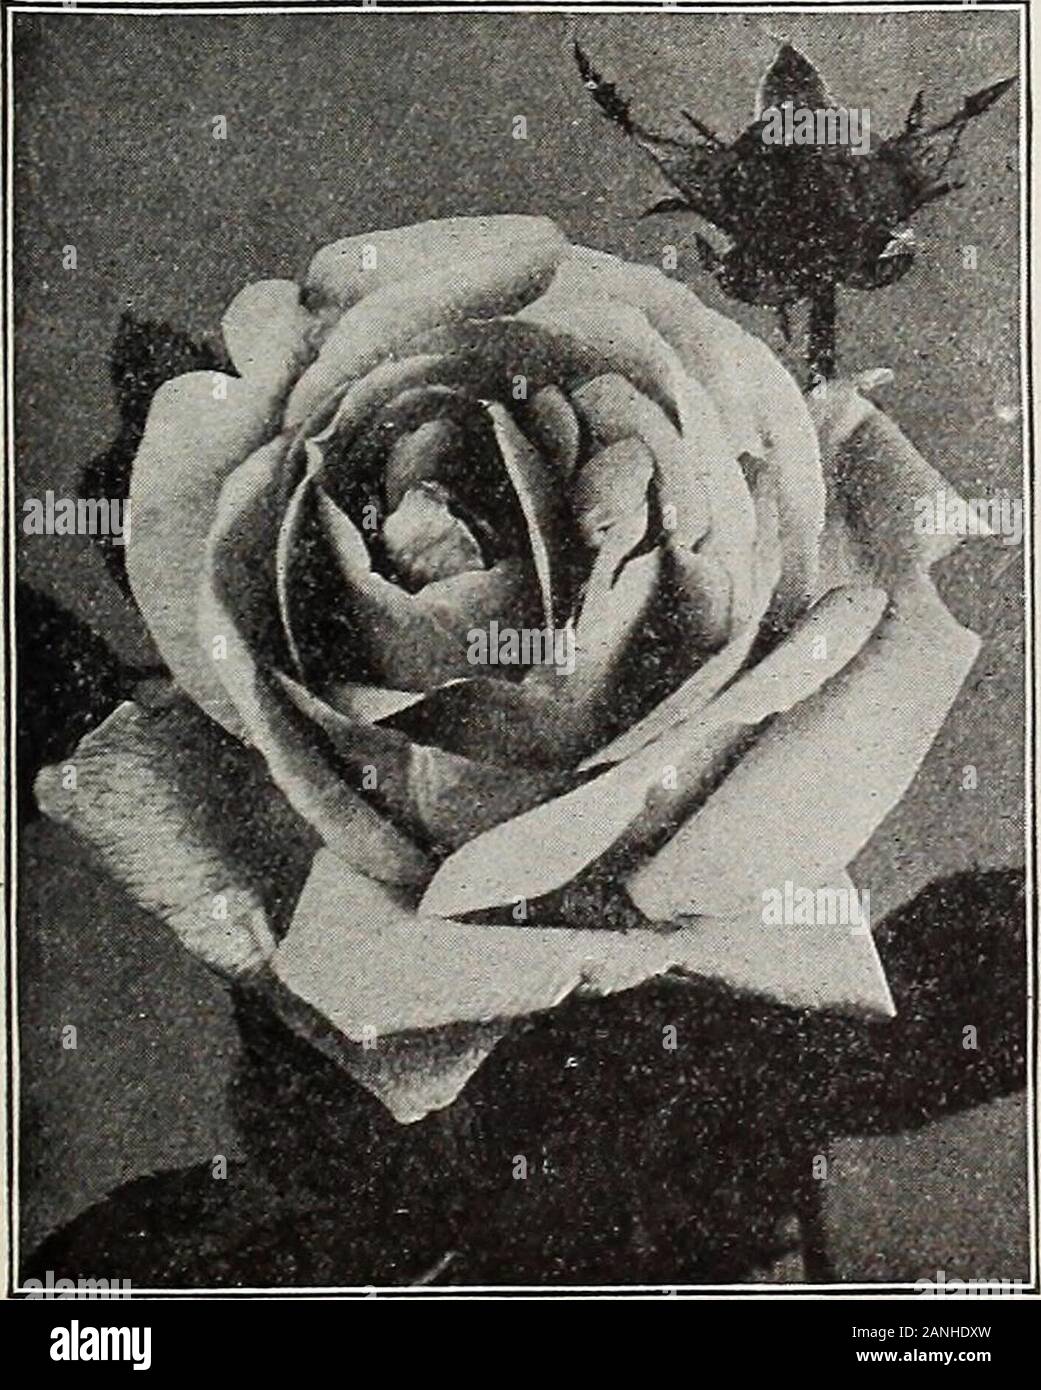 Dreer's 72nd annual edition garden book : 1910 . fine long buds; one of the best for late fall blooming.Mme. Hoste. A pretty, bright pale yellow; large and full.Mme. Joseph Schwartz. Light salmon-rose, changing to creamy-white when fully expanded.Mme. MargOttin. L mon-yellow with saffron centre; large, double flowers.Mme. Welche, Soft peachy yellow, delicately clouded soft rose.Mme. de Watteville. Salmon-white, each petal bordered bright rose.Papa Qontier. Dark crimson-red, with long, pointed buds.Perle des Jardins. Beautiful rich yellow, large size and perfect form.Sunset. Deep apricot-yellow Stock Photo